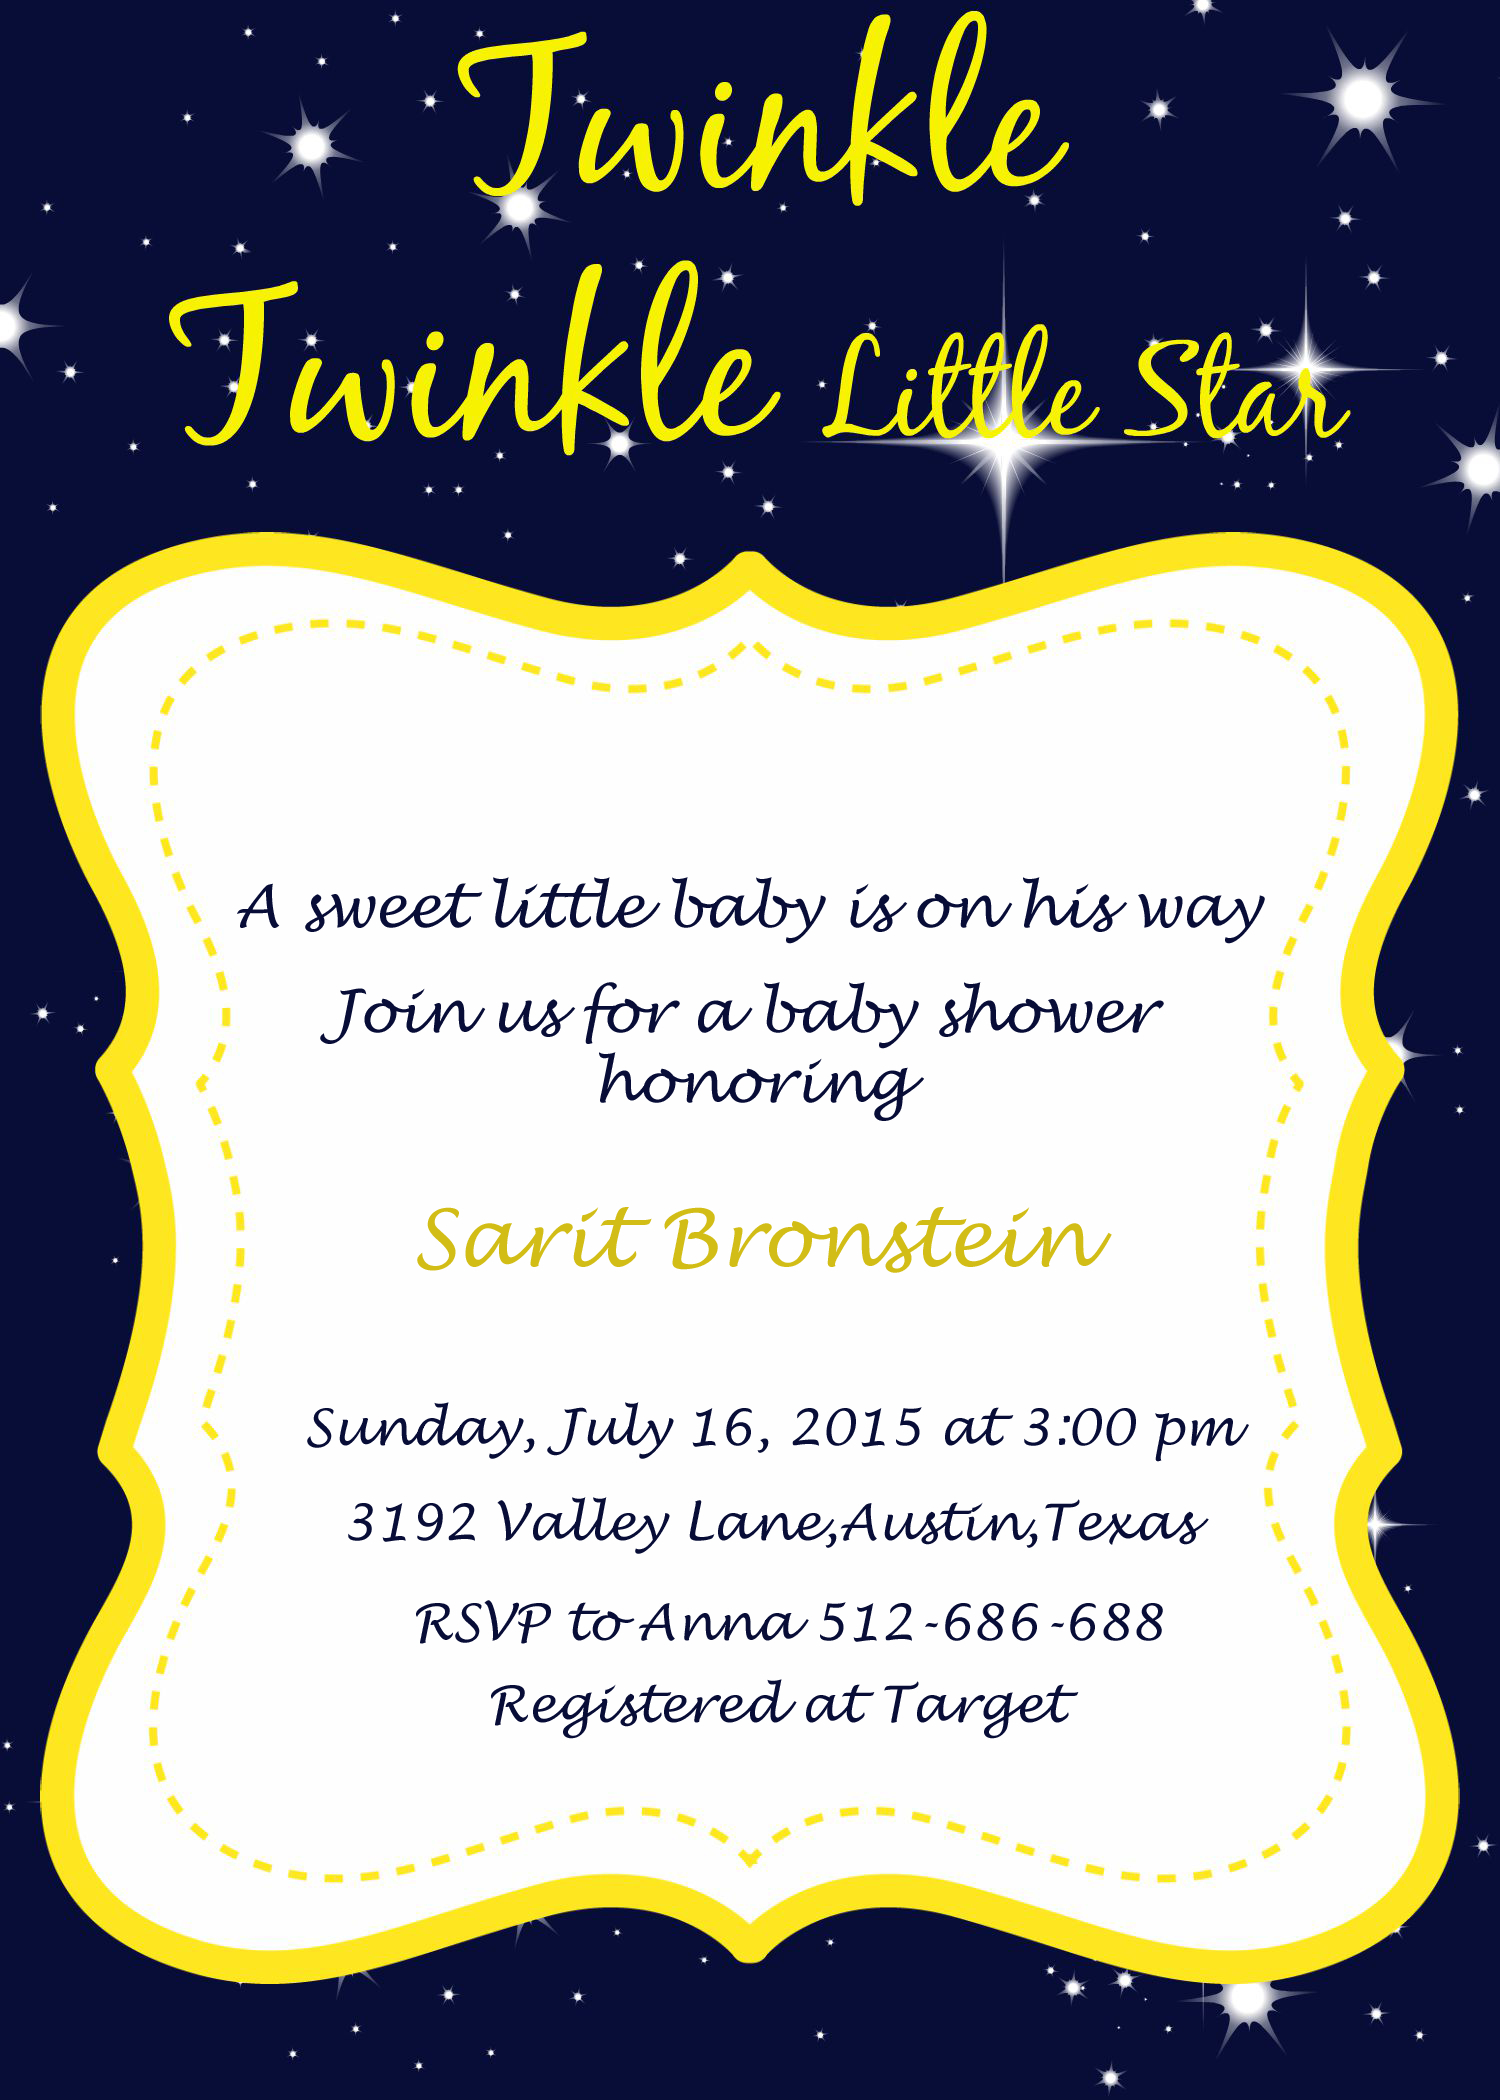 Twinkle Twinkle Baby Shower Ideas - My Practical Baby Shower Guide - Twinkle Twinkle Little Star Baby Shower Free Printables